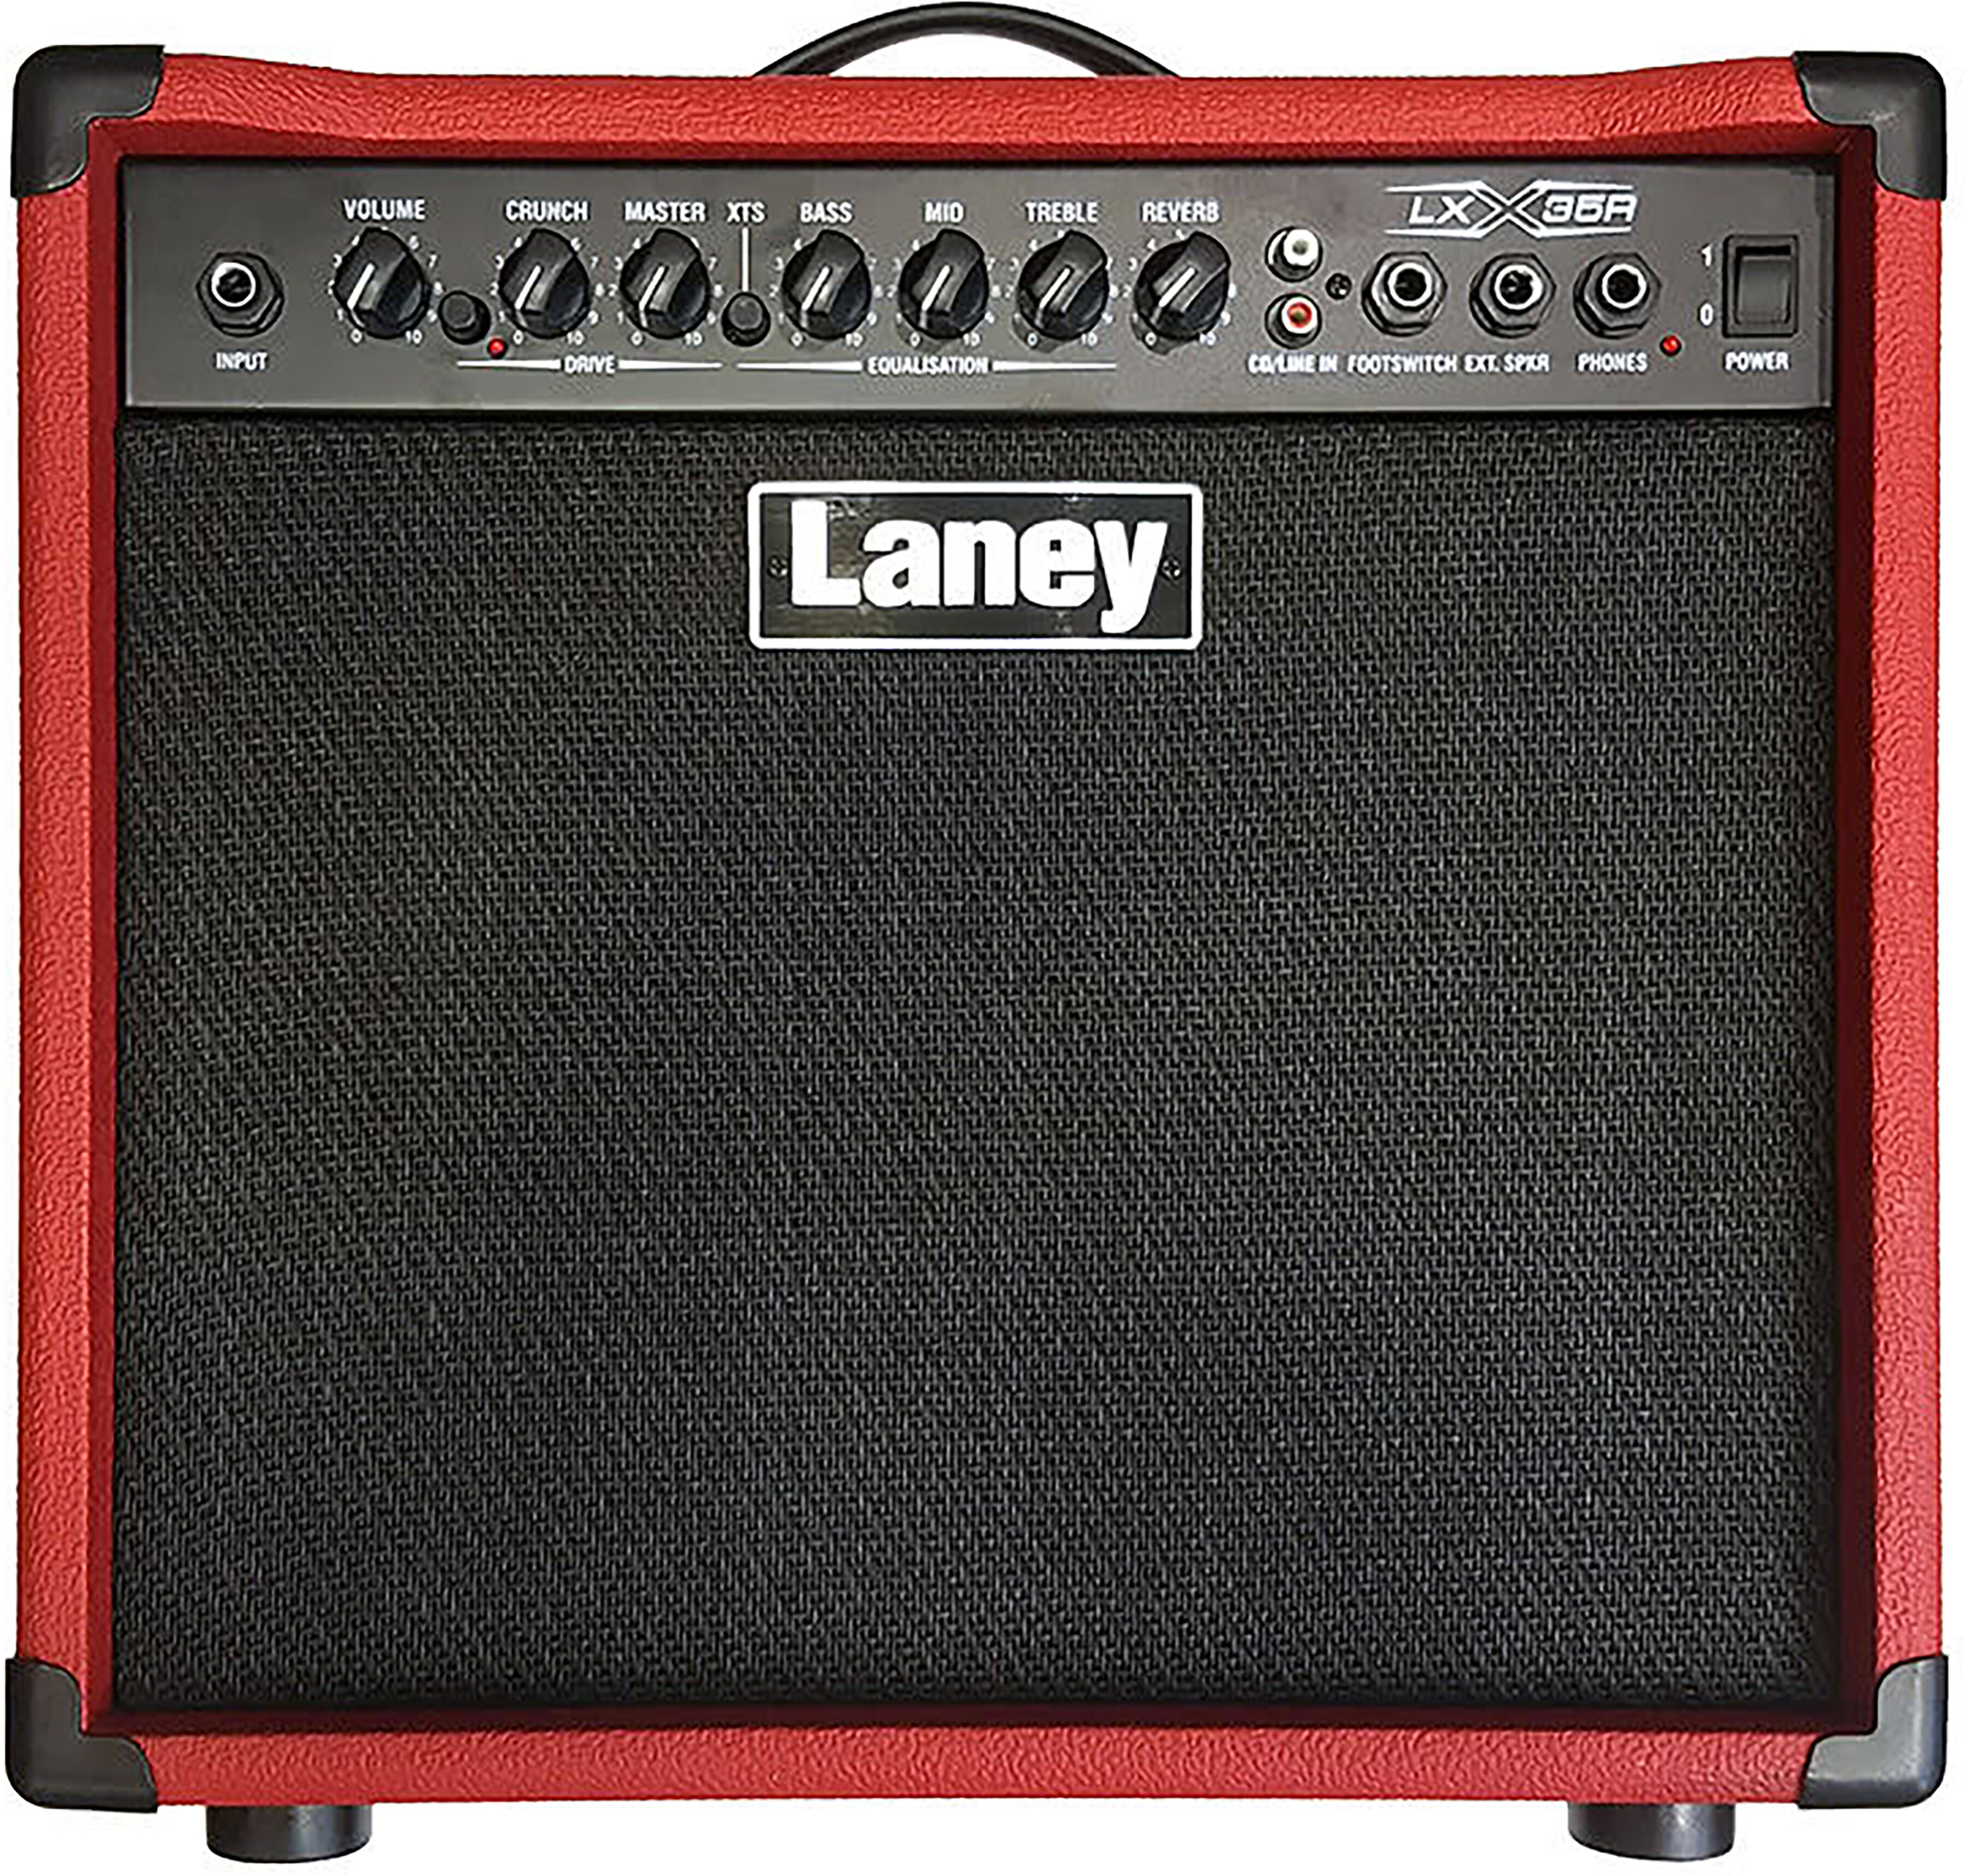 Laney LX35R Guitar Combo 1x10in 35 Watts Red -  LX35R-RED